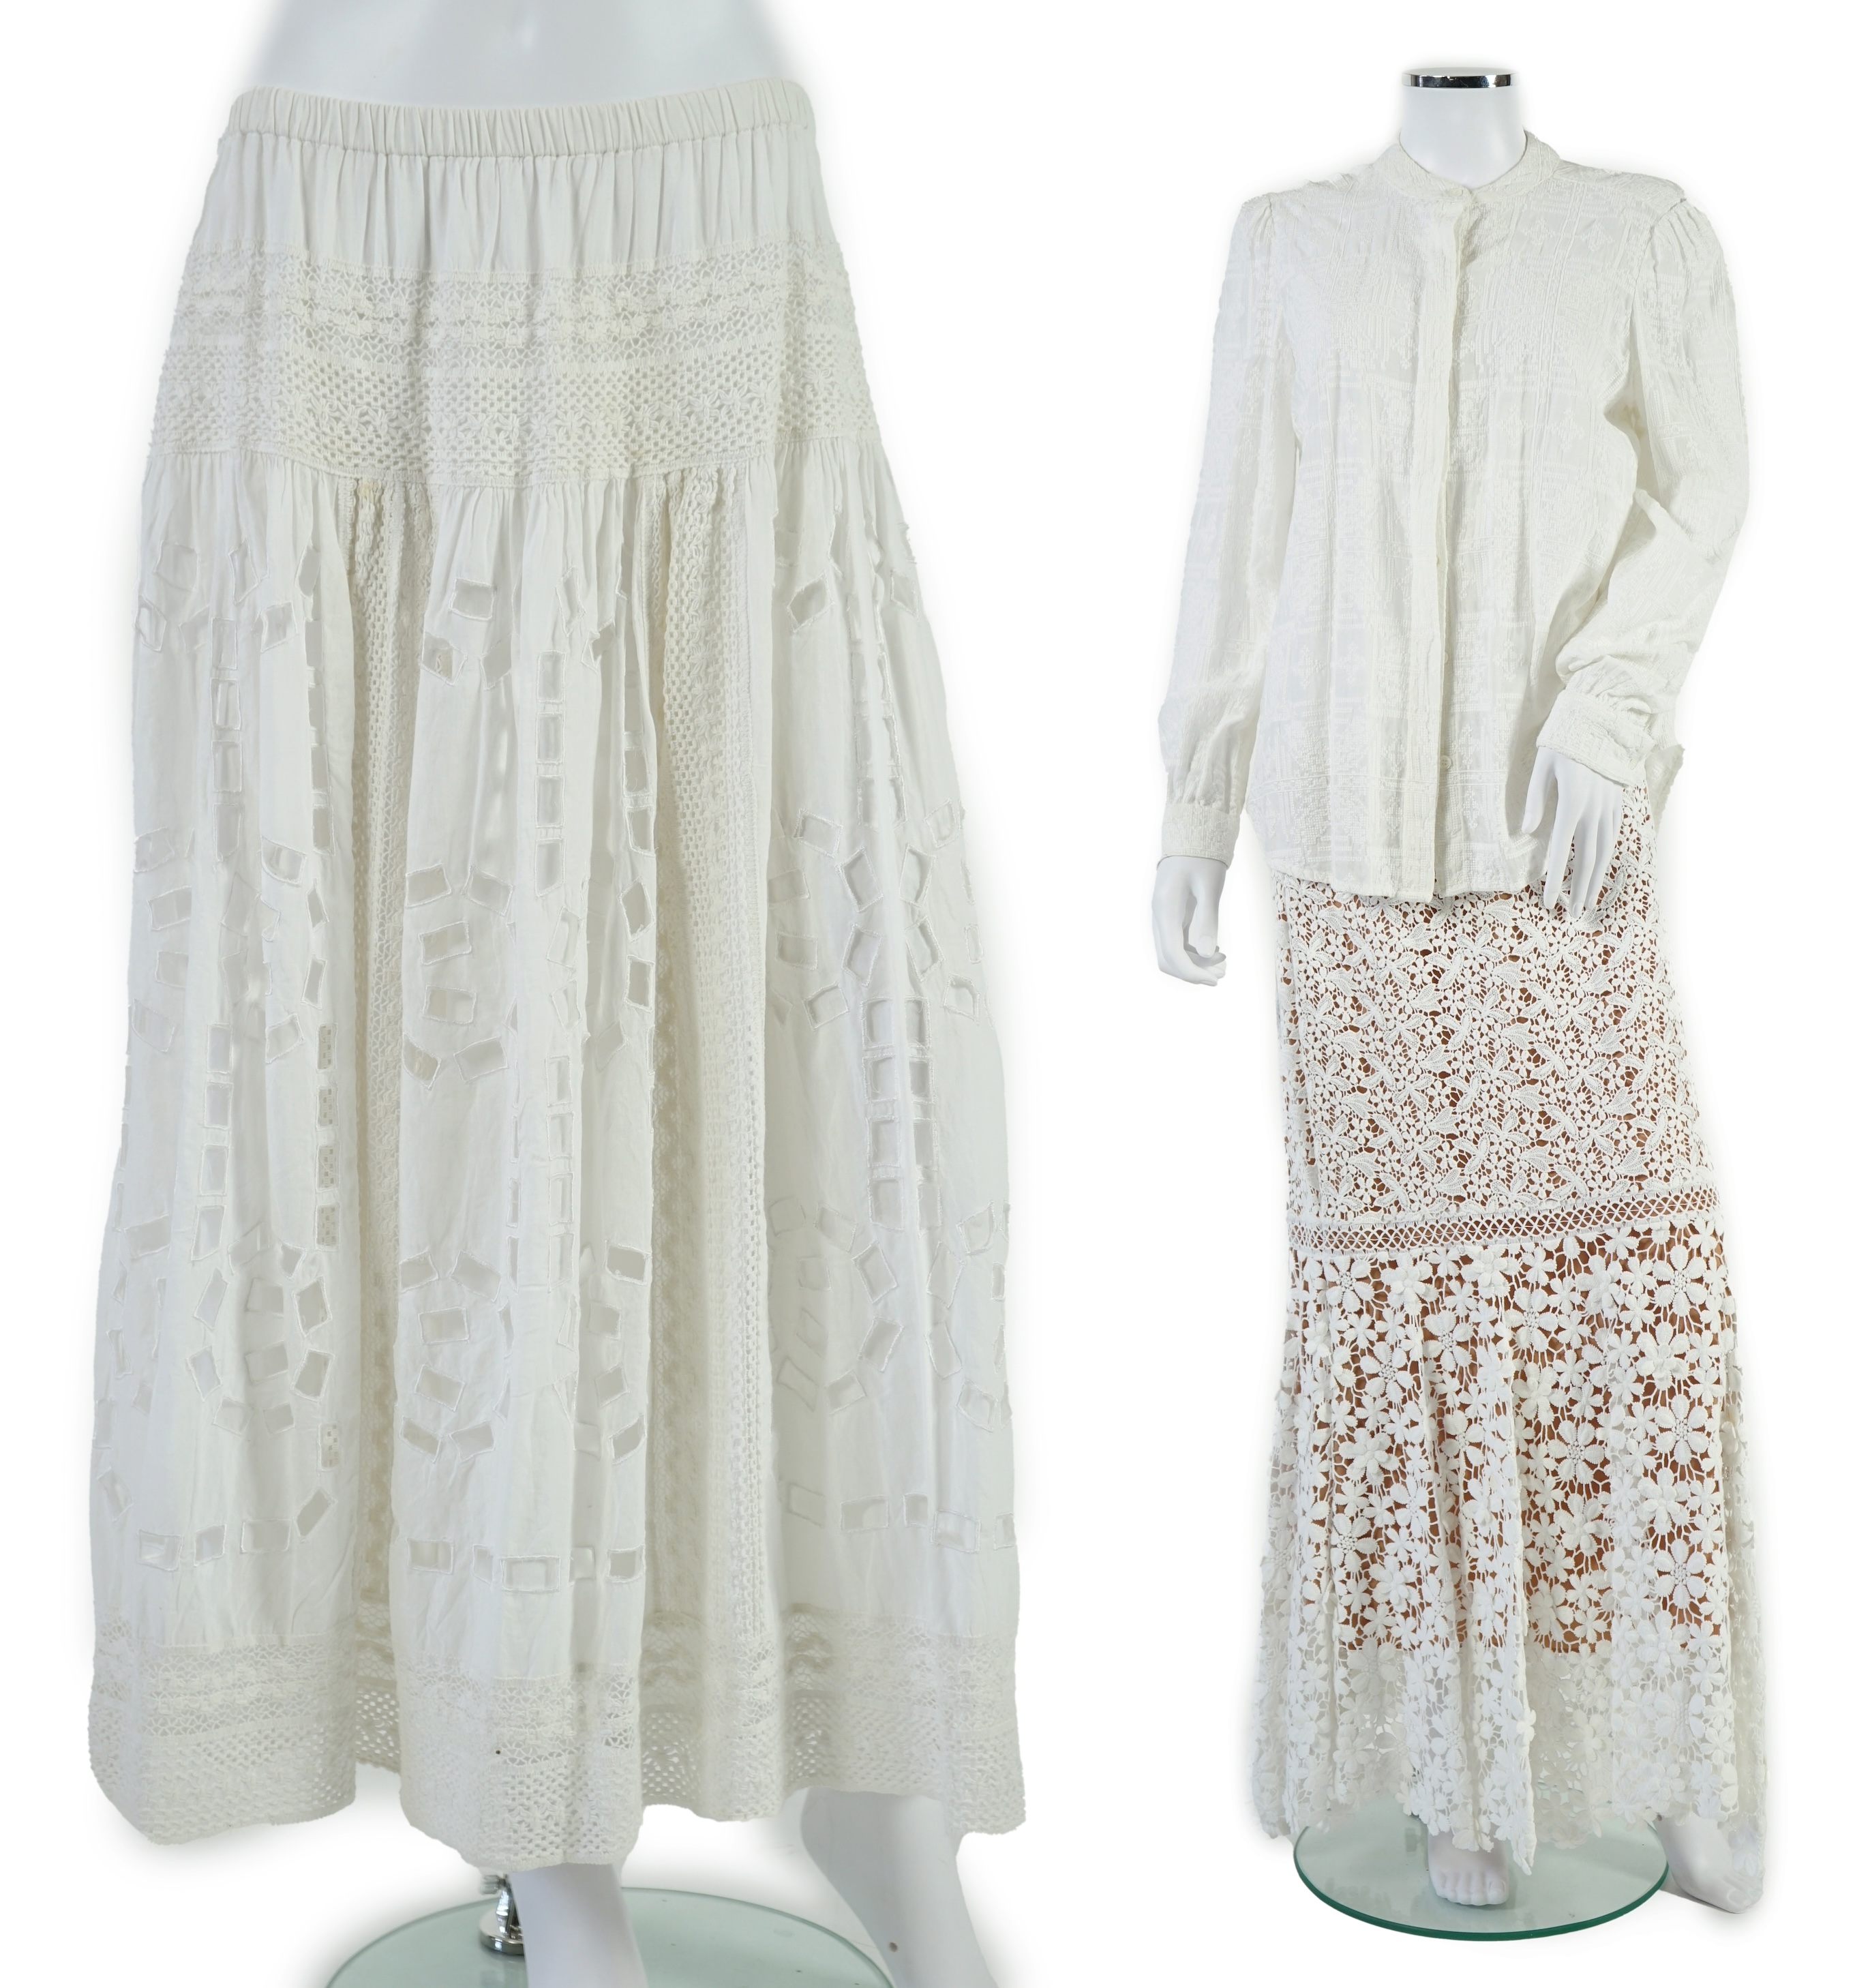 Two Michael Kors white midi length skirts and a white blouse. Size 14 - 16 Proceeds to Happy Paws Puppy Rescue